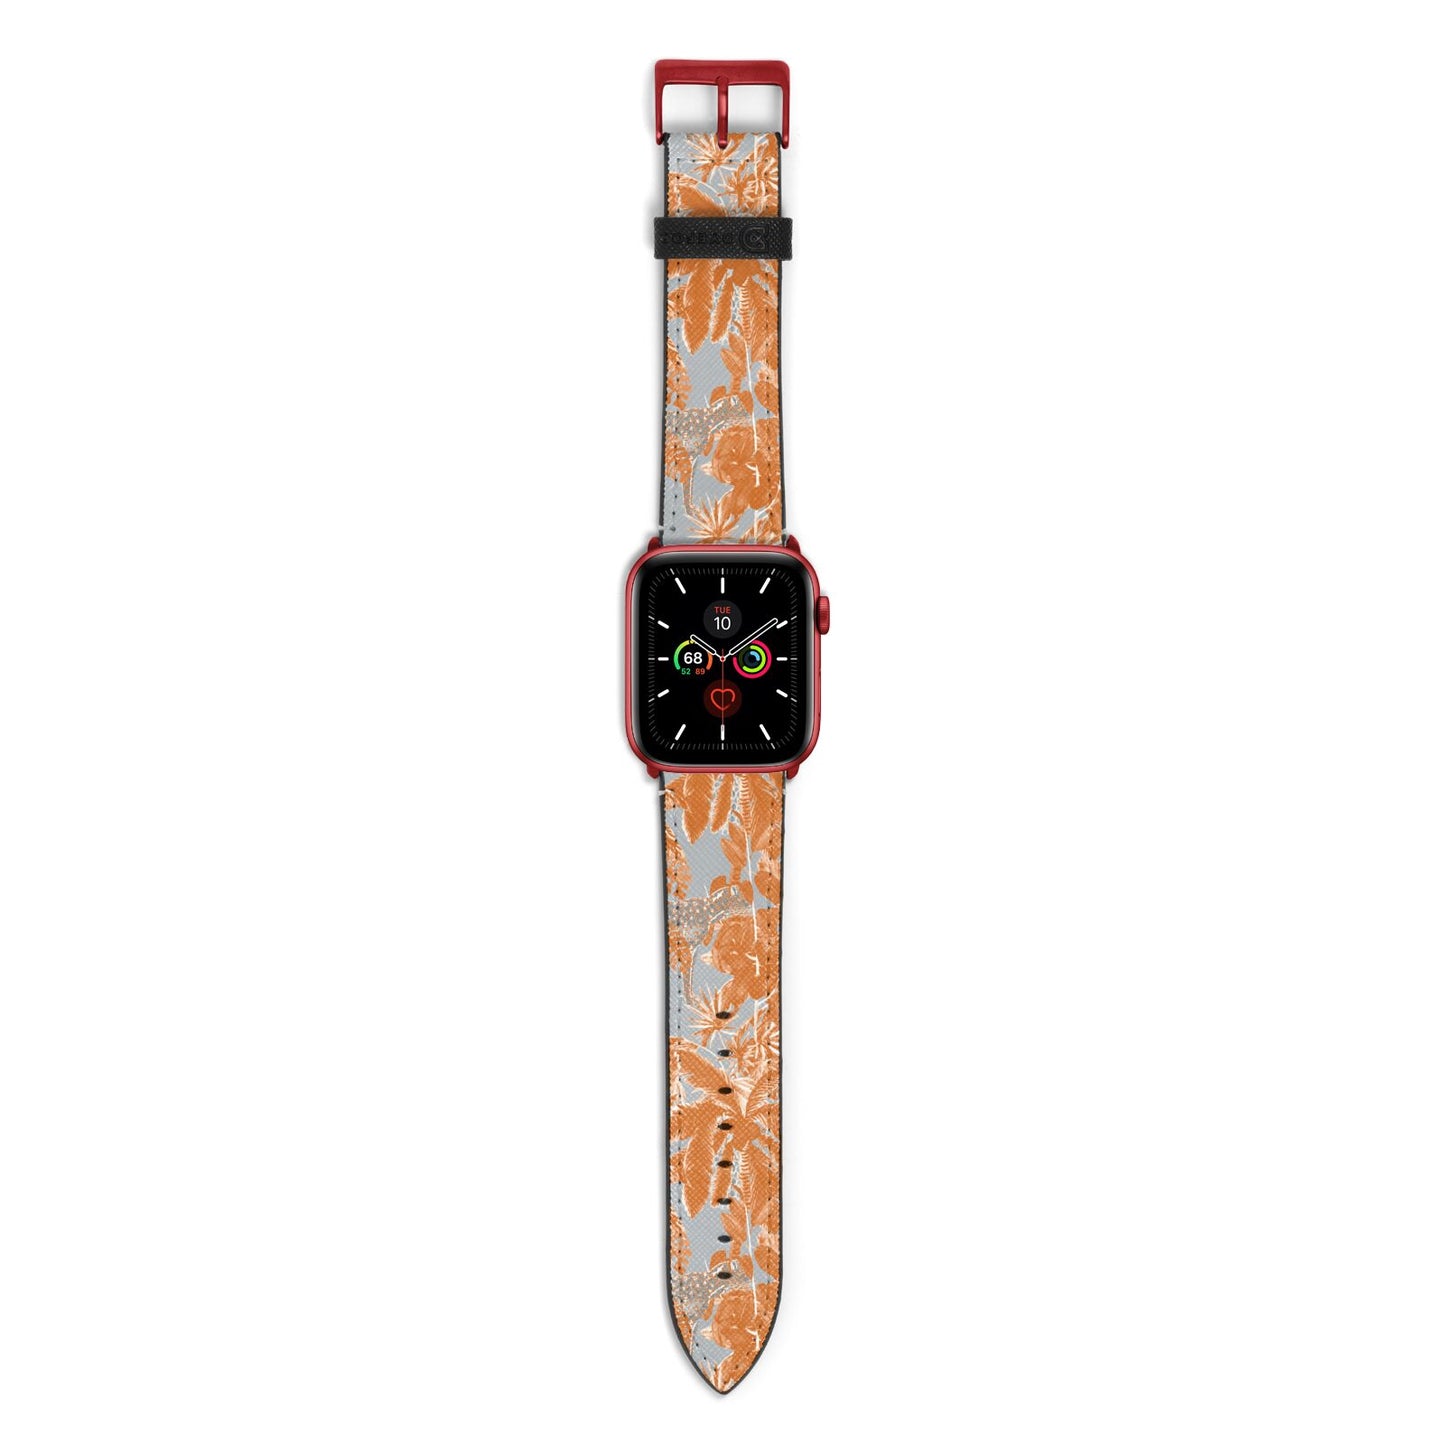 Tropical Apple Watch Strap with Red Hardware